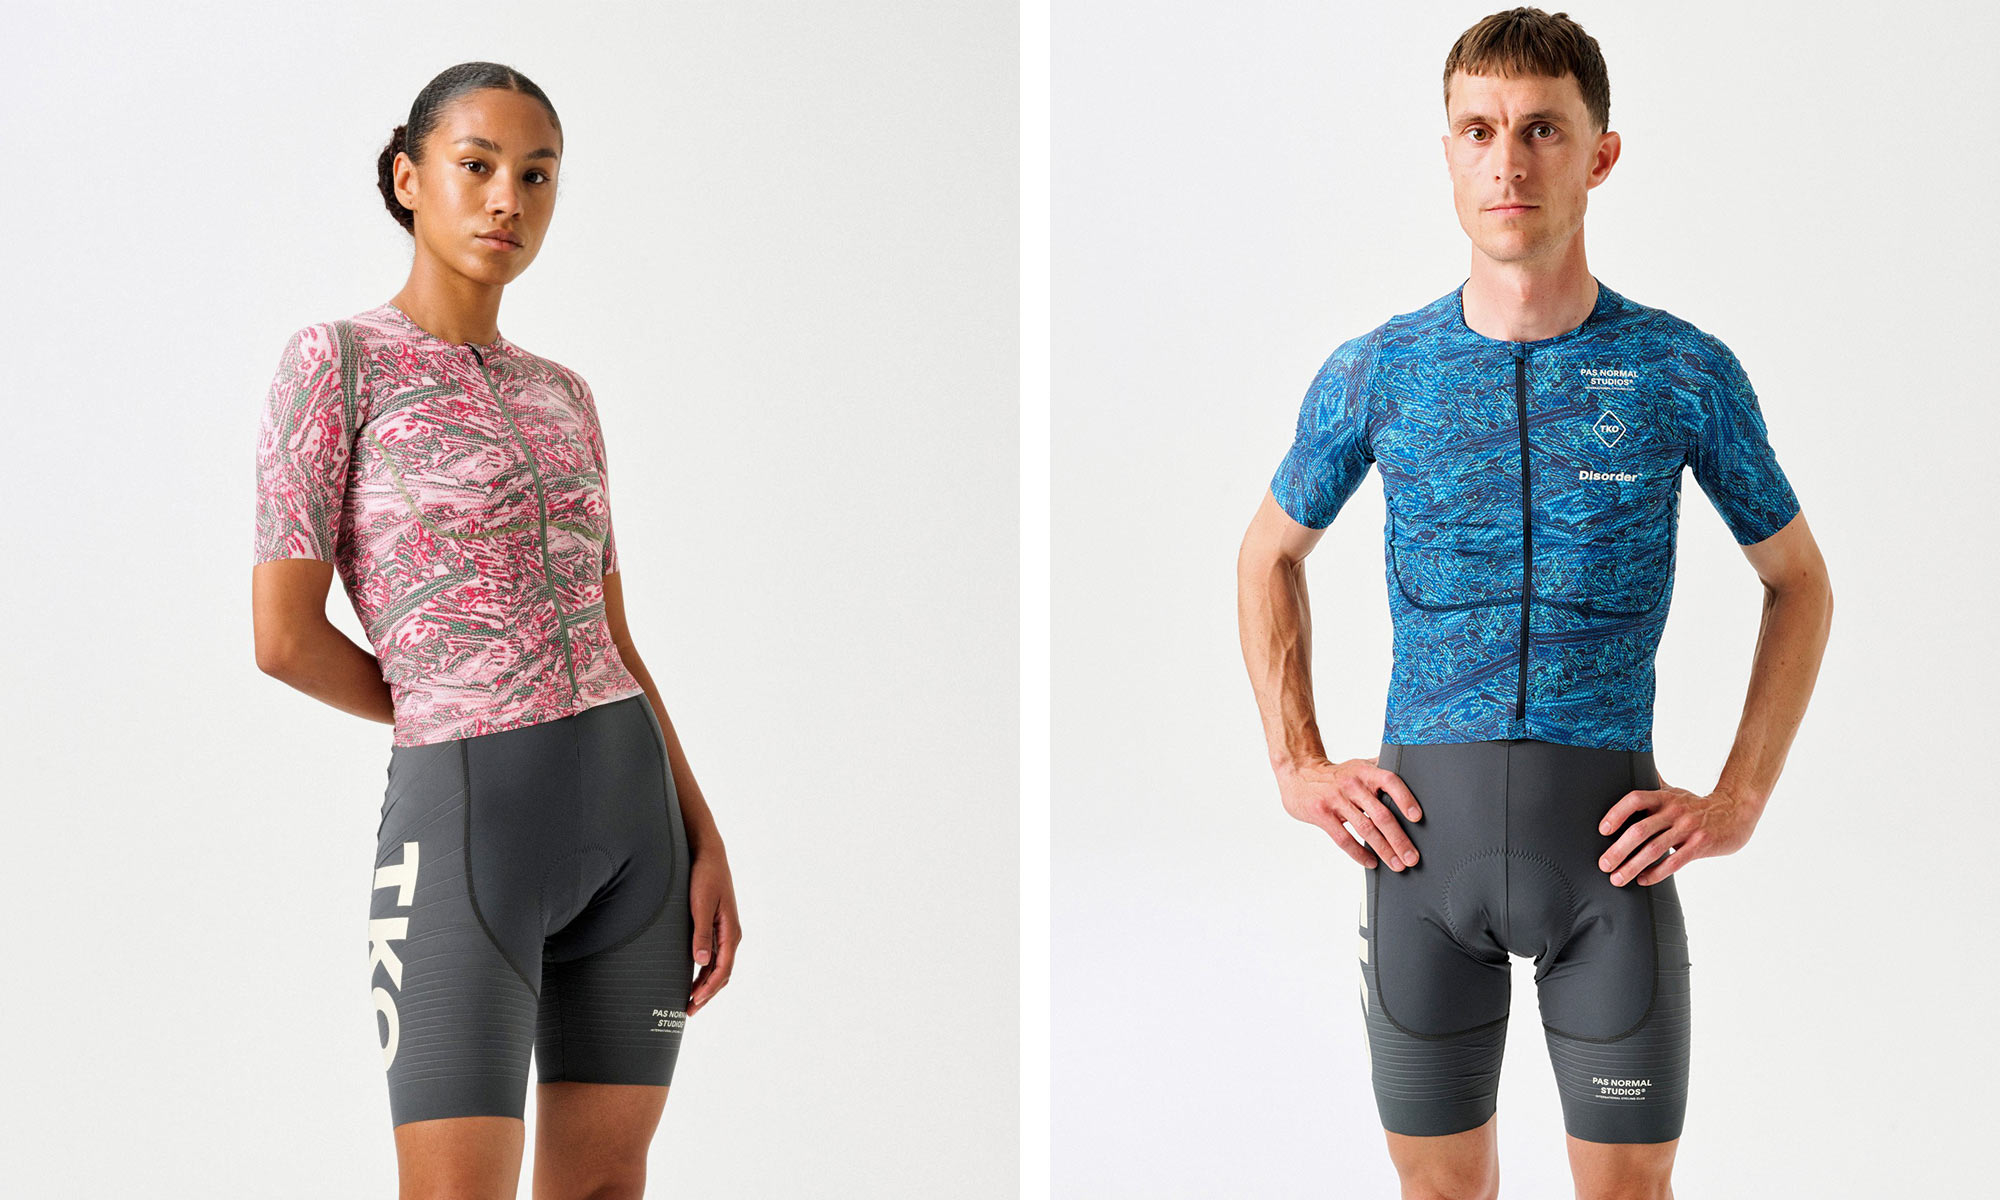 Pas Normal Studios TKO Disorder limited edition versions of Mechanism Pro road cycling kit